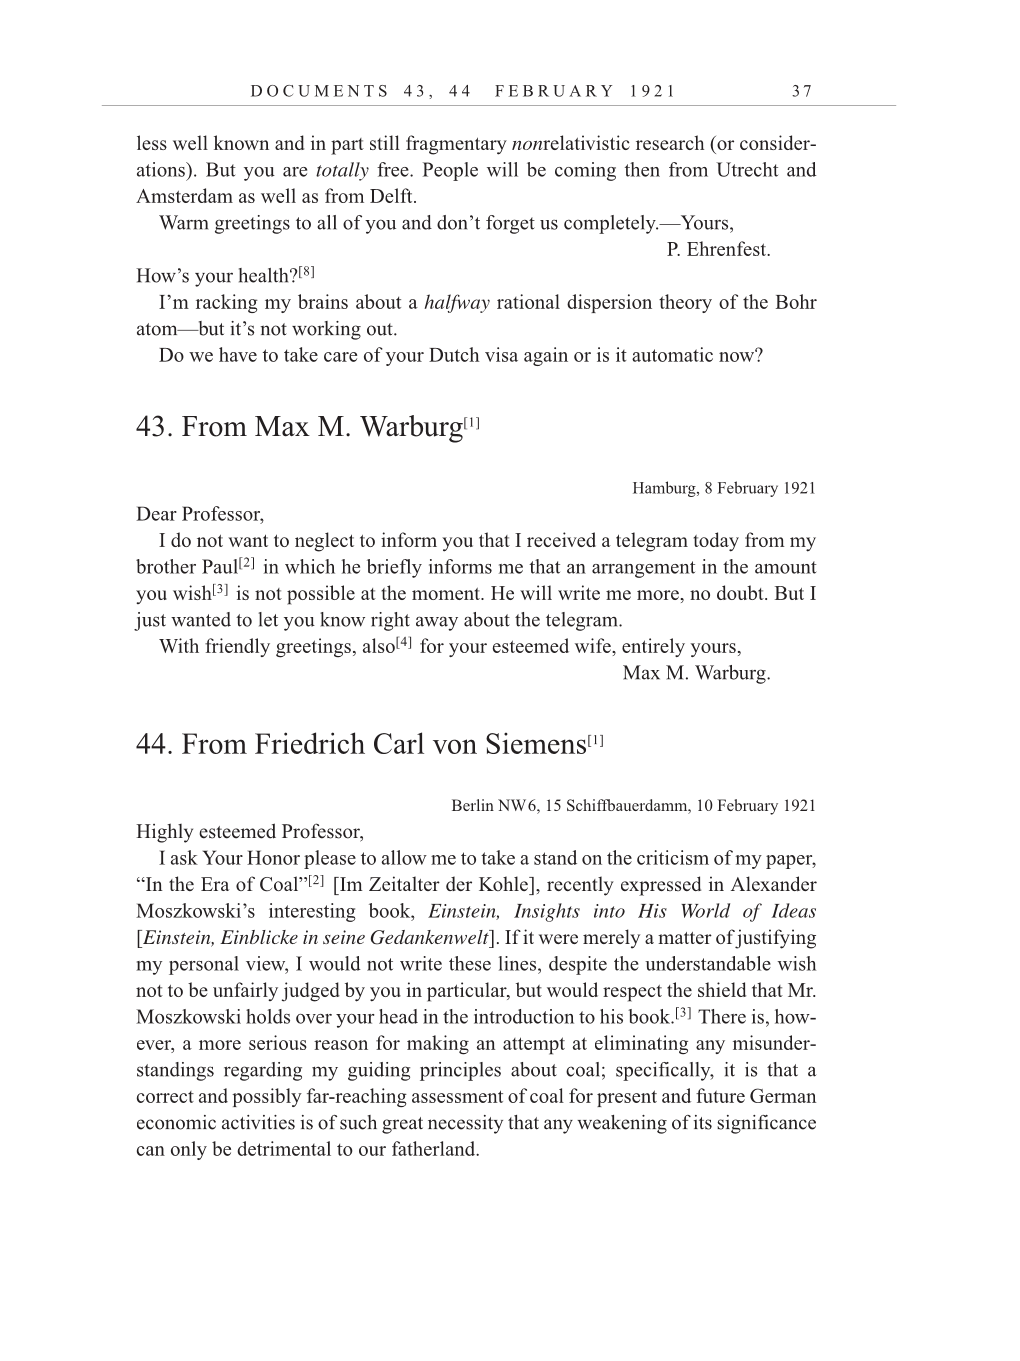 Volume 12: The Berlin Years: Correspondence, January-December 1921 (English translation supplement) page 37